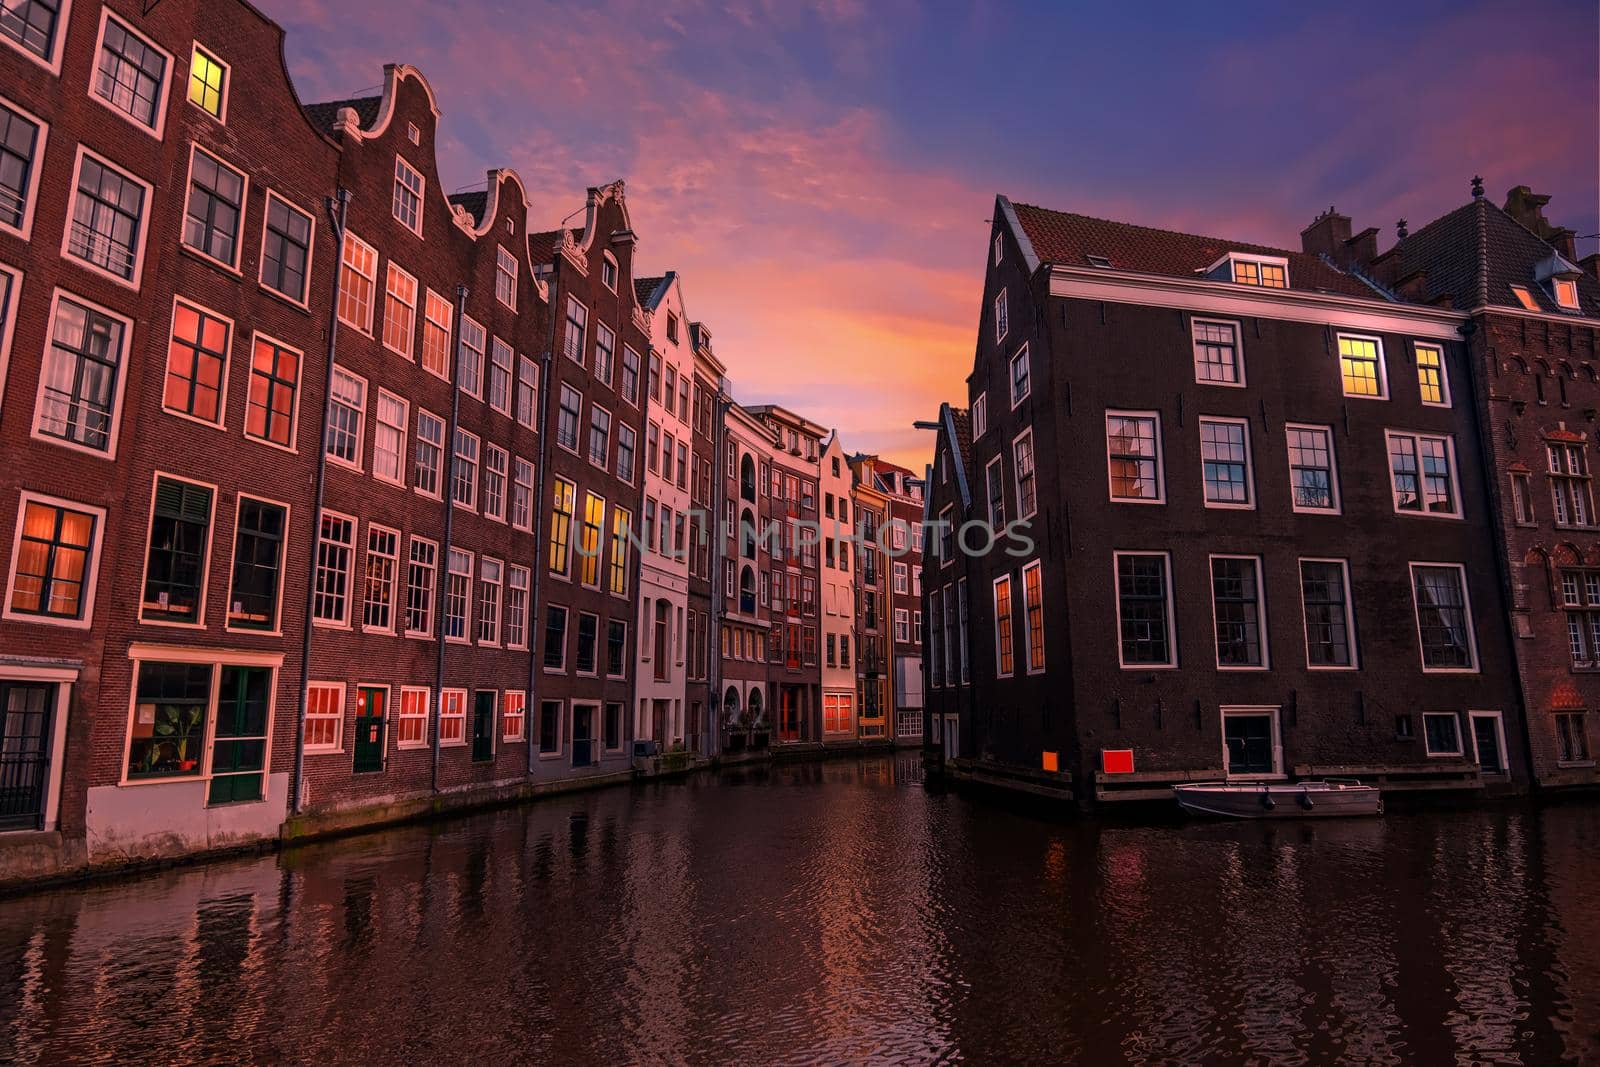 Traditional houses in the city center from Amsterdam in the Netherlands at sunset by devy